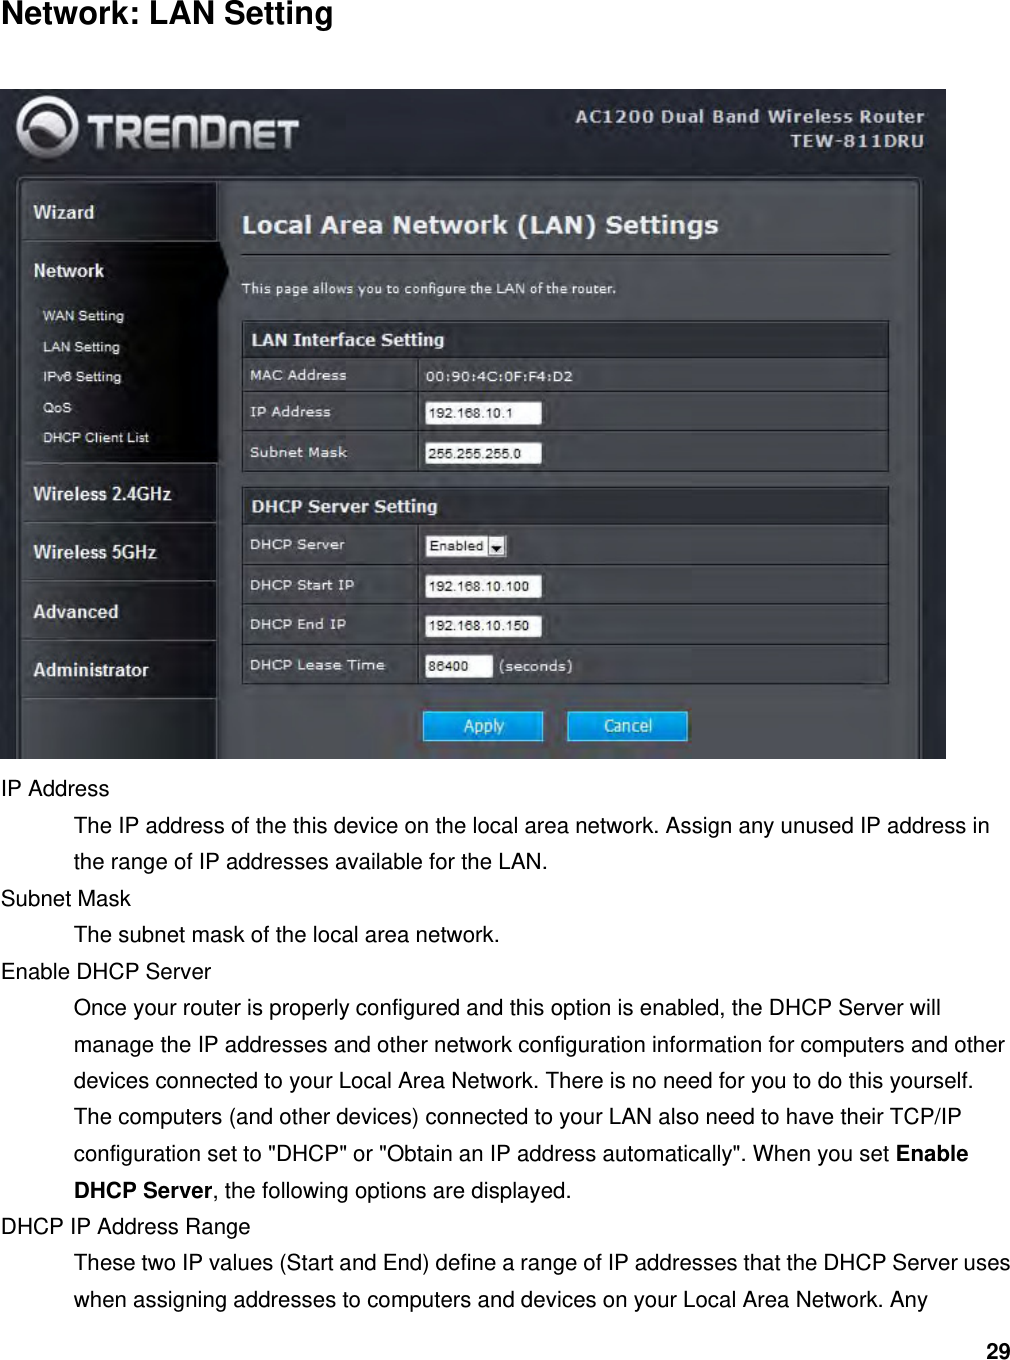 29 Network: LAN Setting  IP Address   The IP address of the this device on the local area network. Assign any unused IP address in the range of IP addresses available for the LAN.   Subnet Mask   The subnet mask of the local area network.   Enable DHCP Server   Once your router is properly configured and this option is enabled, the DHCP Server will manage the IP addresses and other network configuration information for computers and other devices connected to your Local Area Network. There is no need for you to do this yourself.   The computers (and other devices) connected to your LAN also need to have their TCP/IP configuration set to &quot;DHCP&quot; or &quot;Obtain an IP address automatically&quot;. When you set Enable DHCP Server, the following options are displayed.   DHCP IP Address Range   These two IP values (Start and End) define a range of IP addresses that the DHCP Server uses when assigning addresses to computers and devices on your Local Area Network. Any 